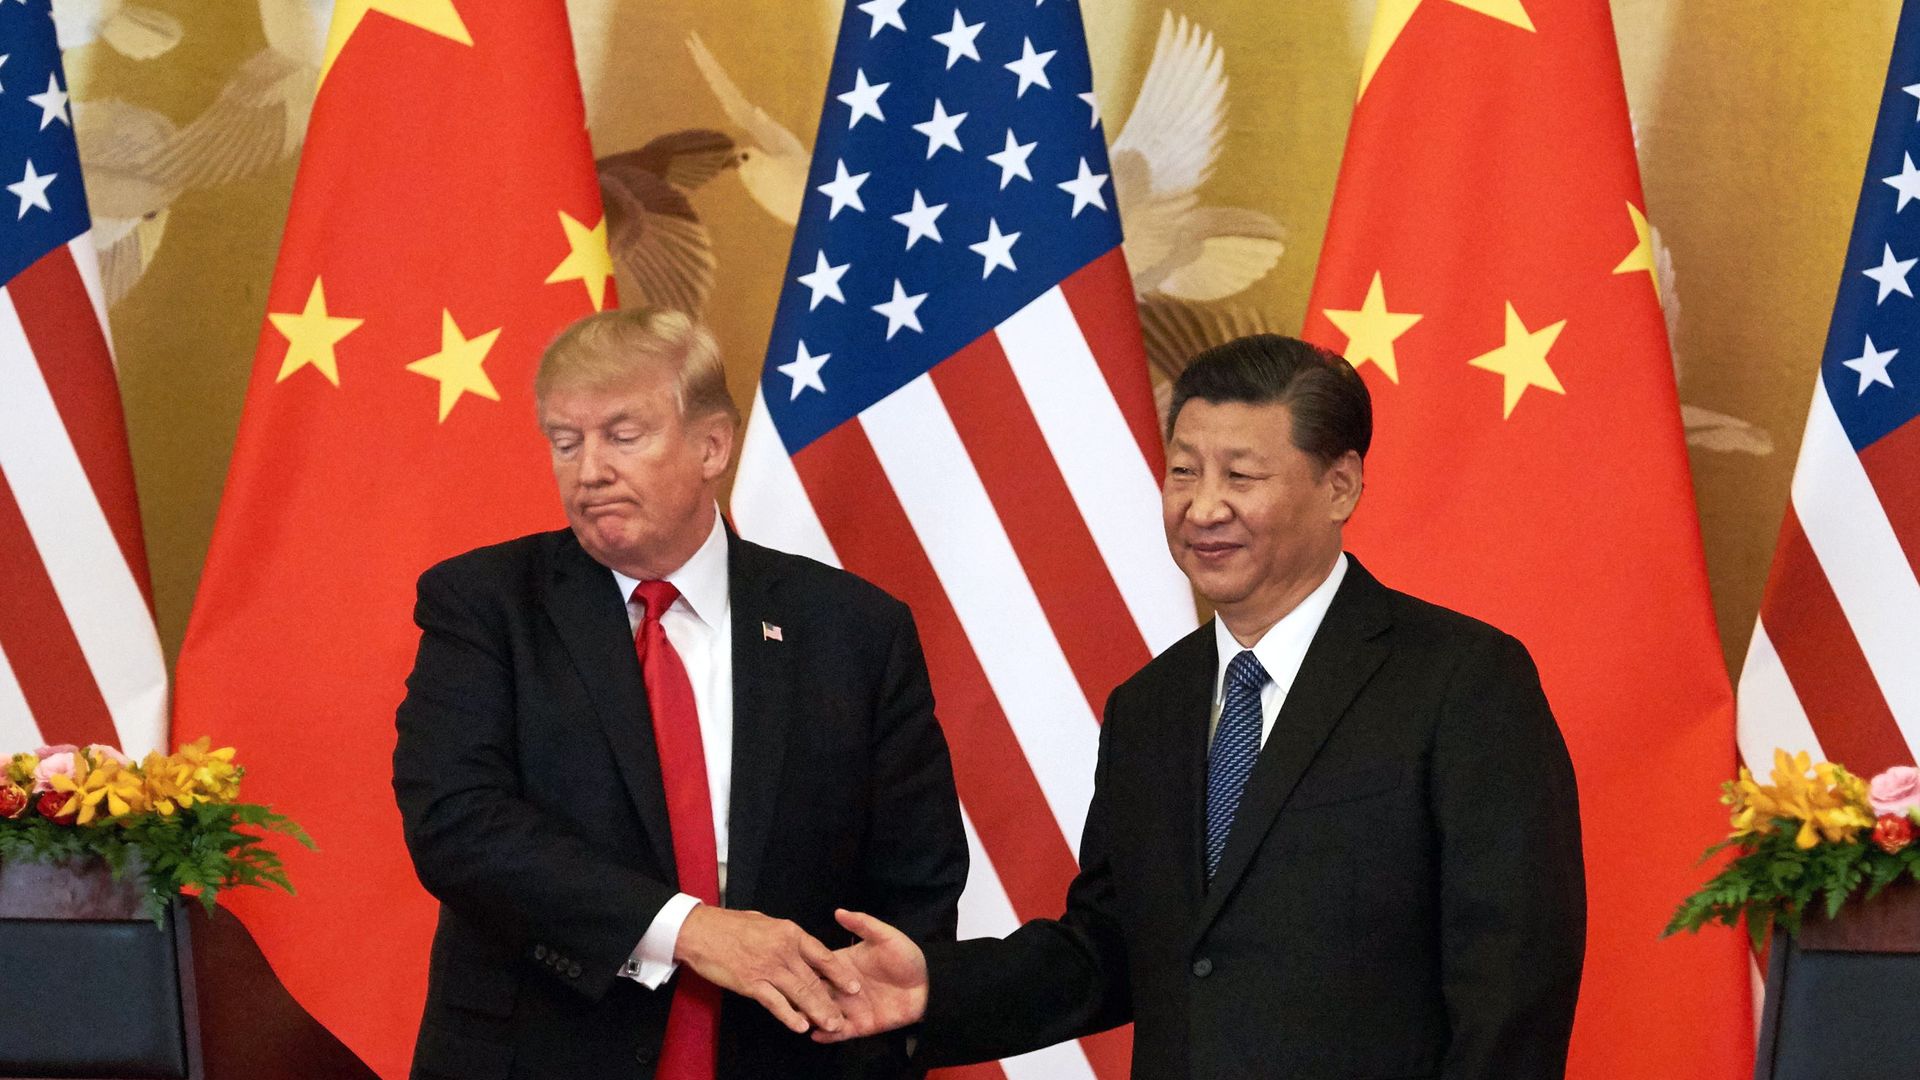 Donald Trump grimaces while shaking hands with Xi Jinping before American and Chinese flags.